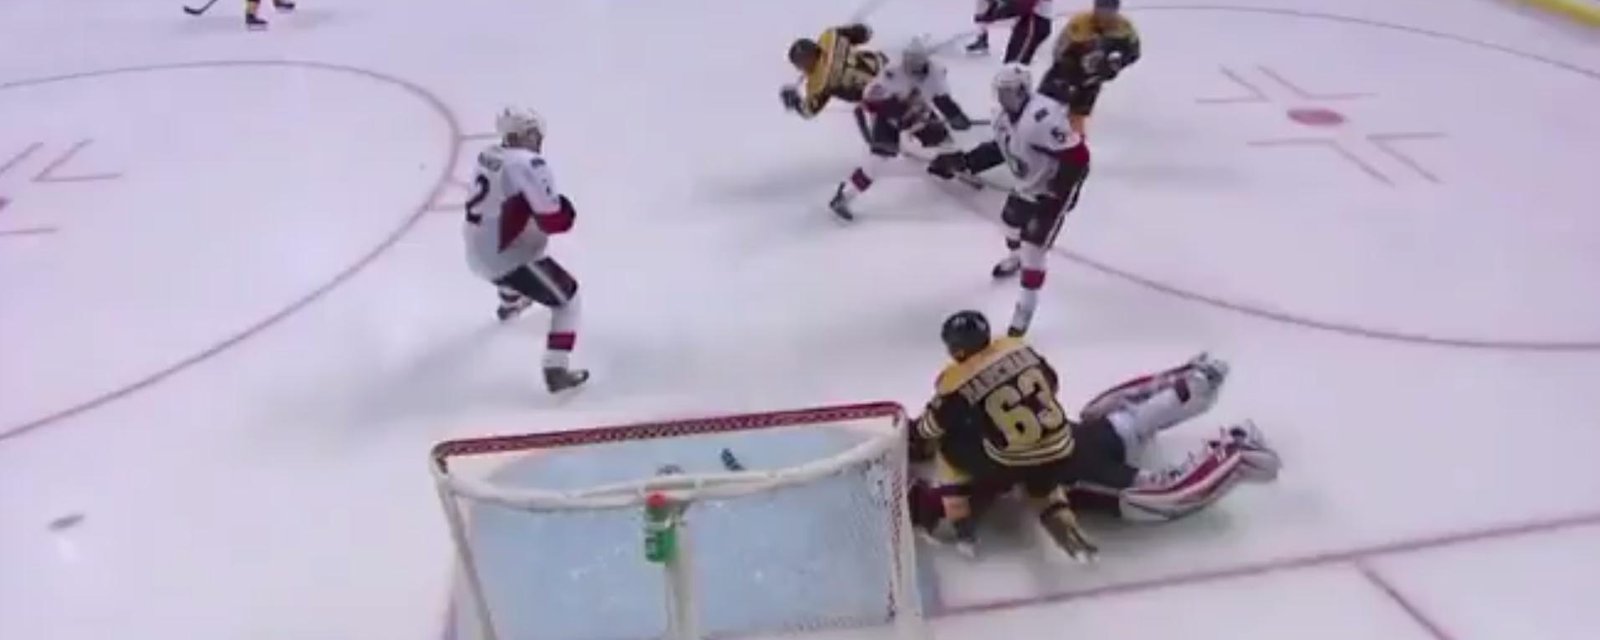 Brad Marchand went for the cheap shot in tight game. 